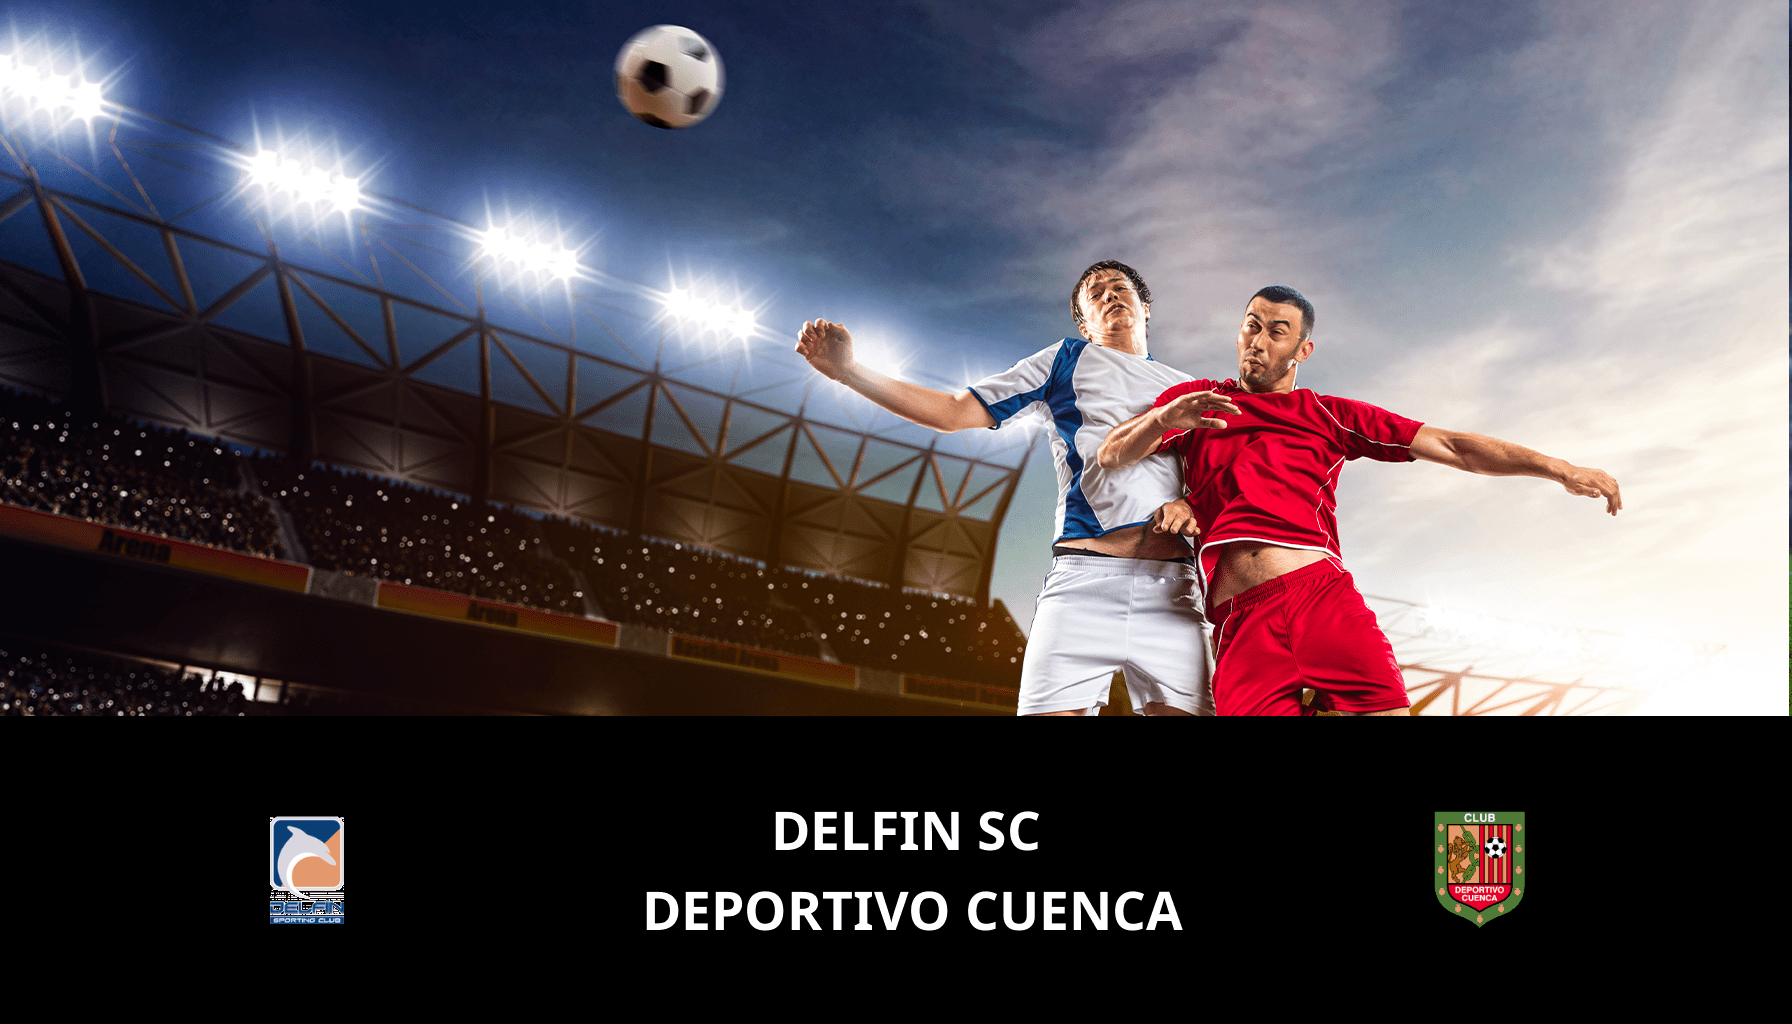 Prediction for Delfin SC VS Deportivo Cuenca on 14/11/2023 Analysis of the match